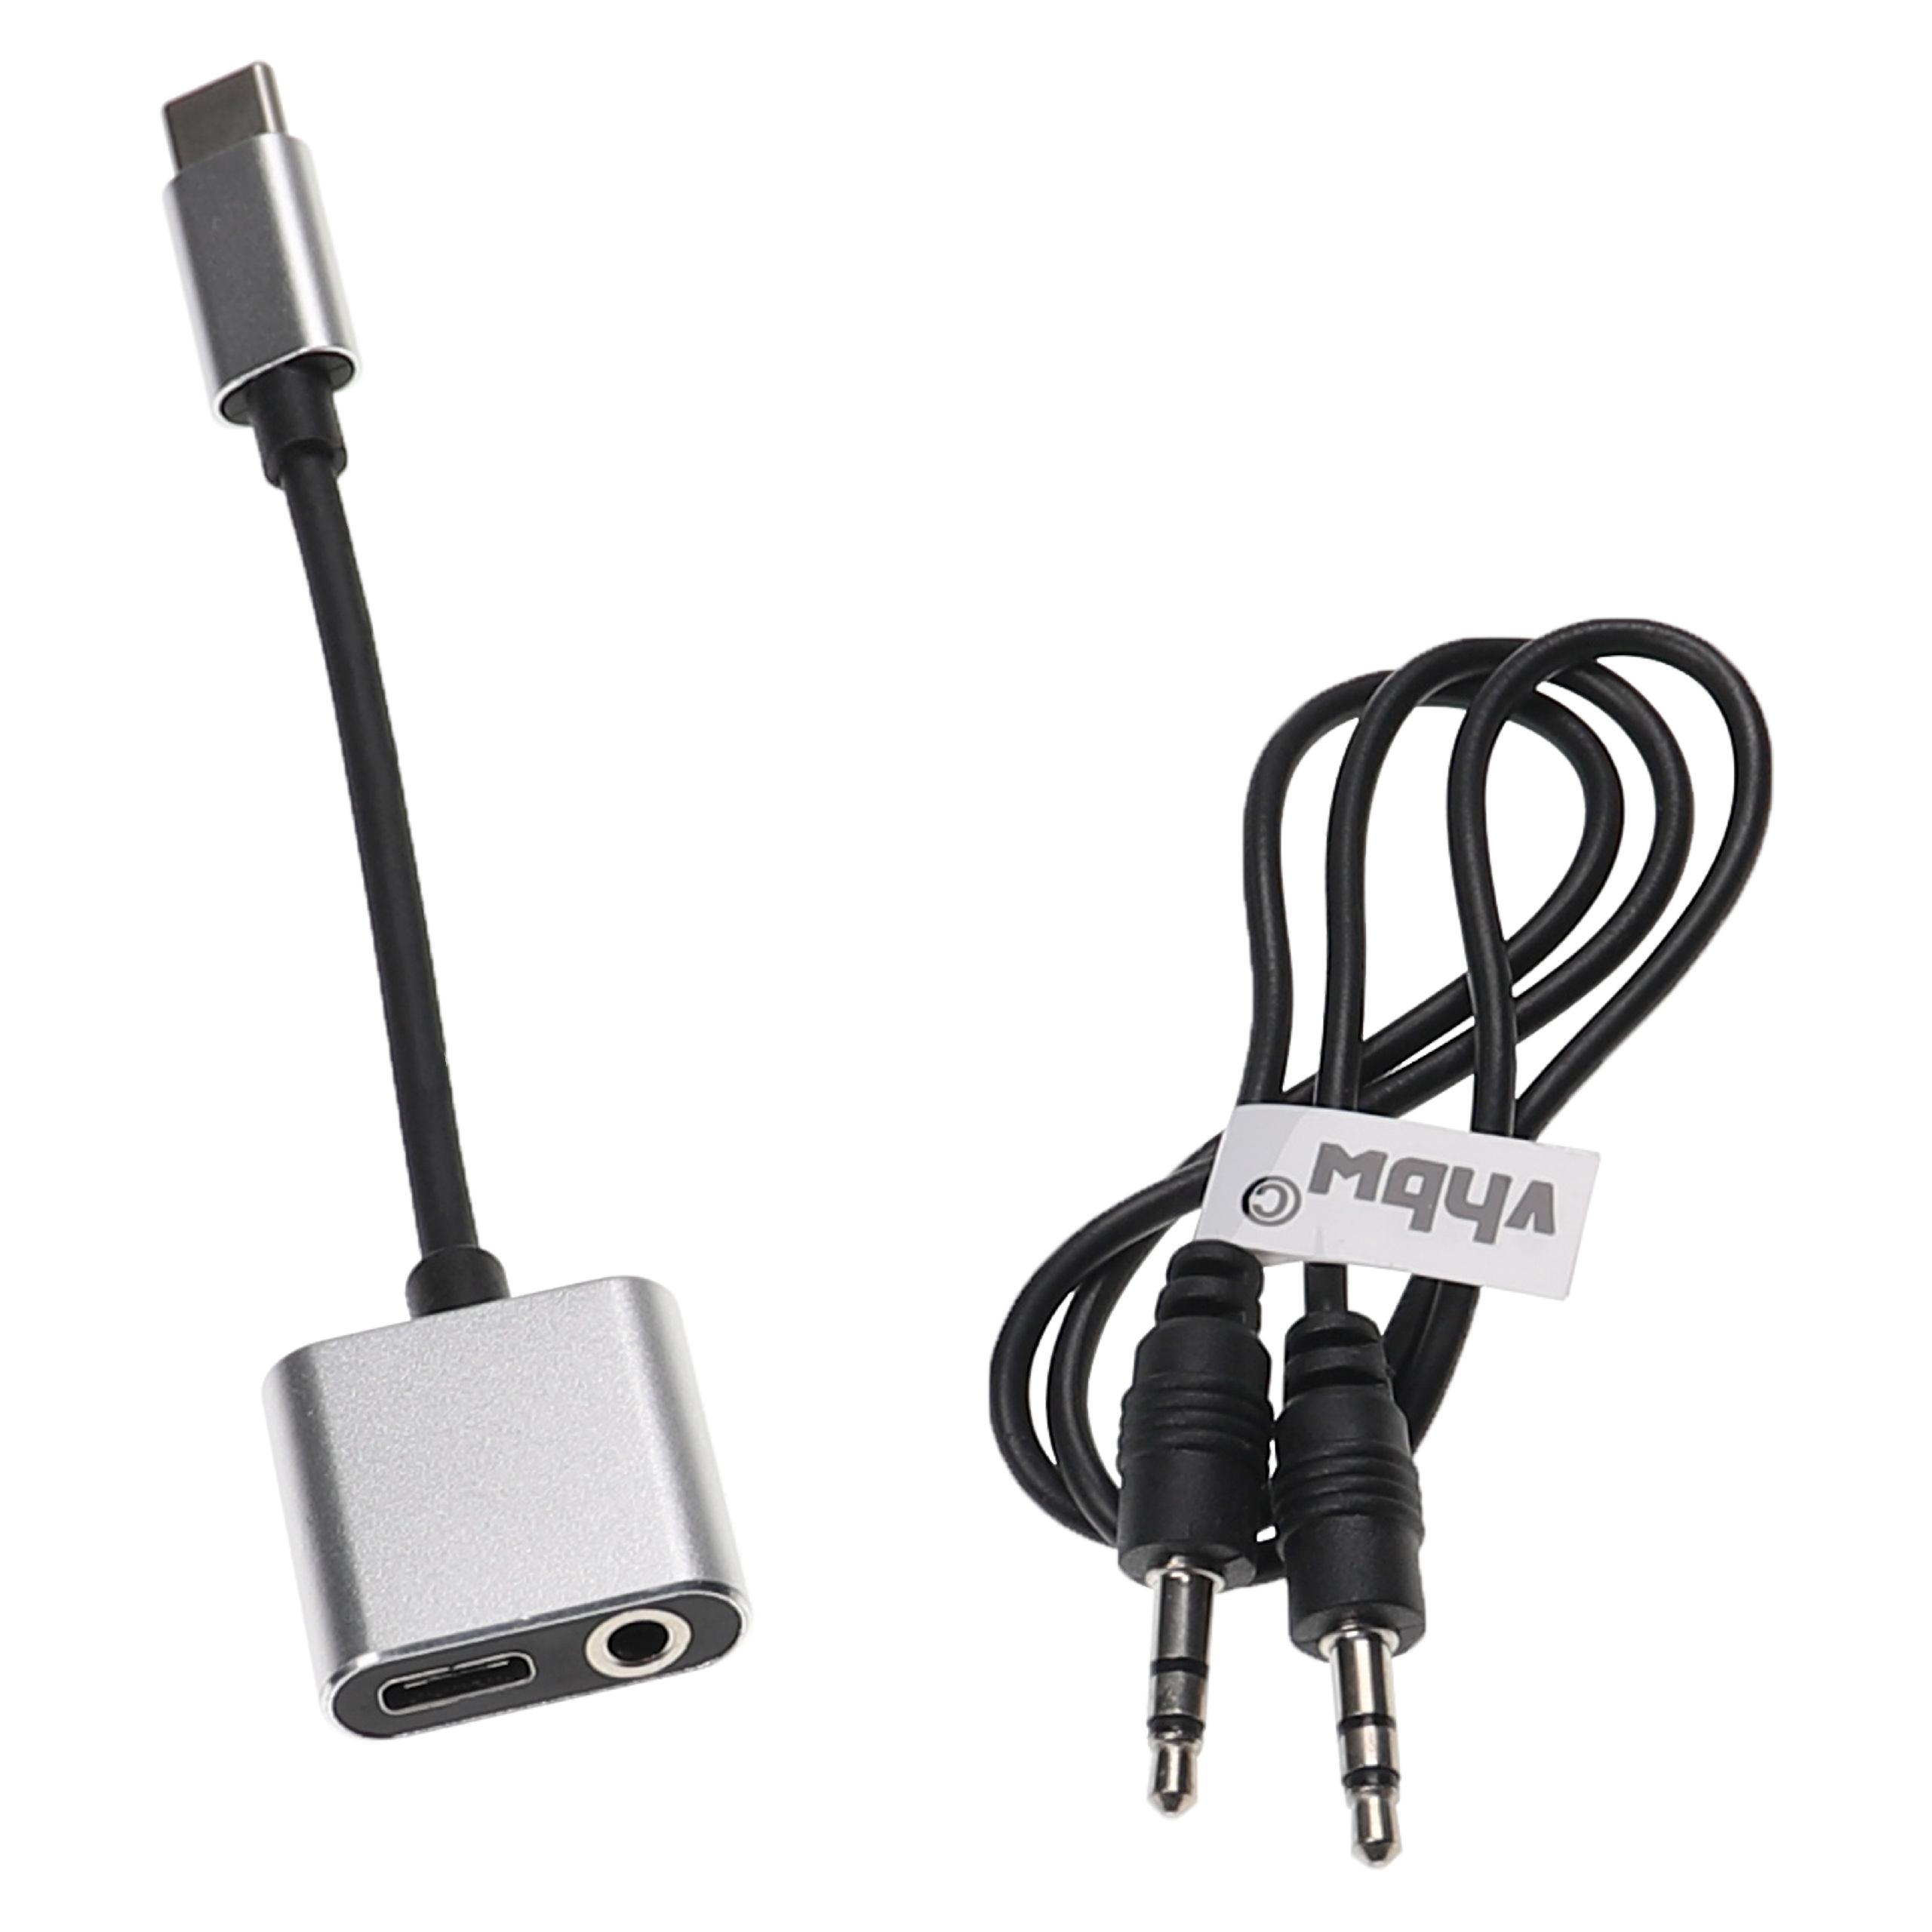 2-in-1 Adapter USB C to AUX for Huawei, Xiaomi, Motorola Smartphone etc. - Incl. Jack Cable